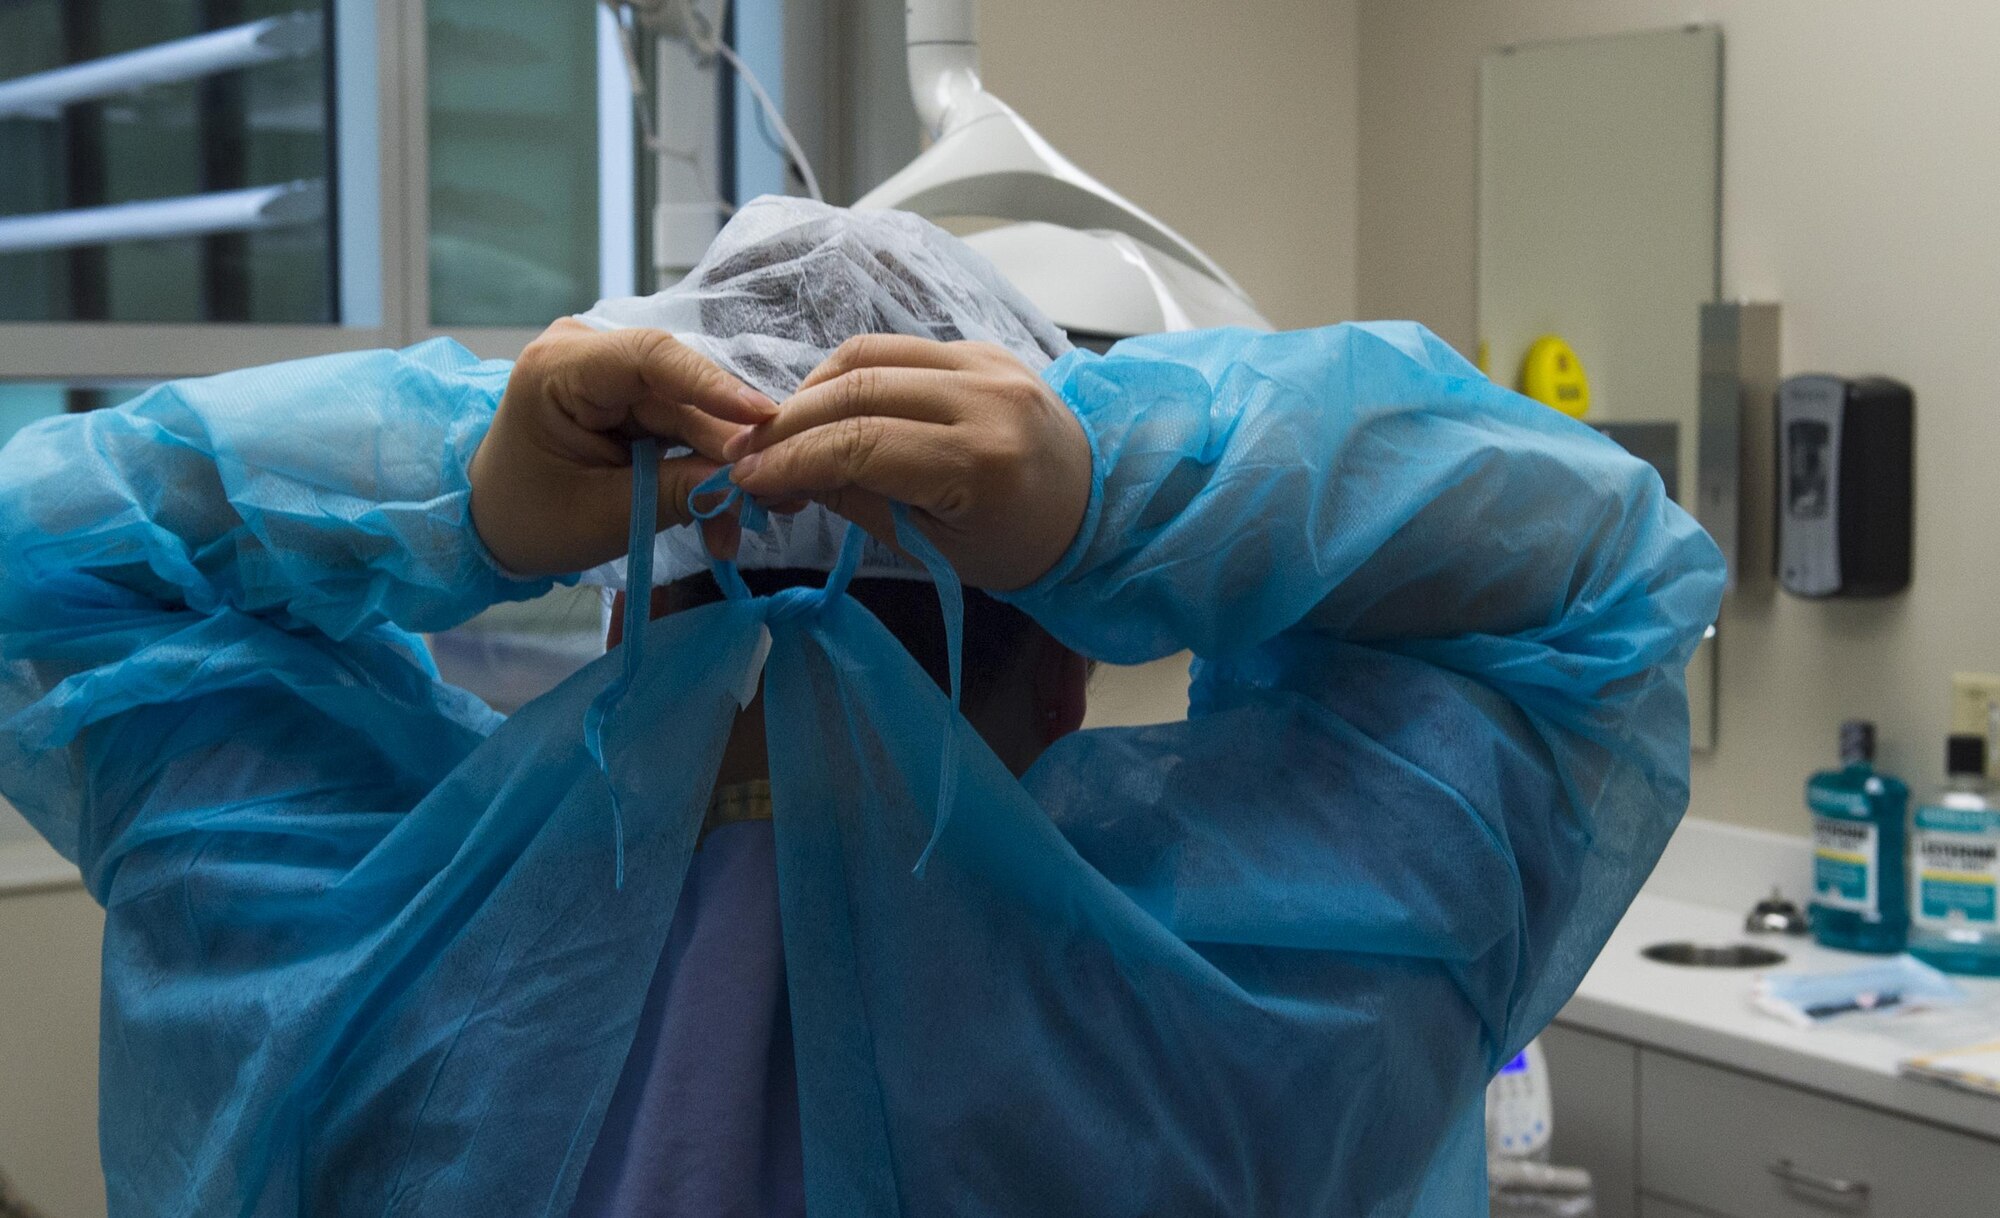 Master Sgt. Millicent Cavazos, 779th Medical Group dental squadron dental hygienist, ties a surgical gown before performing a dental cleaning at Joint Base Andrews, Md., Jan. 6, 2017. The clinic, based out of the new edition to Malcolm Grow Medical Clinics and Surgery Center, sees approximately 500 patients a month. (U.S. Air Force photo by Senior Airman Mariah Haddenham)